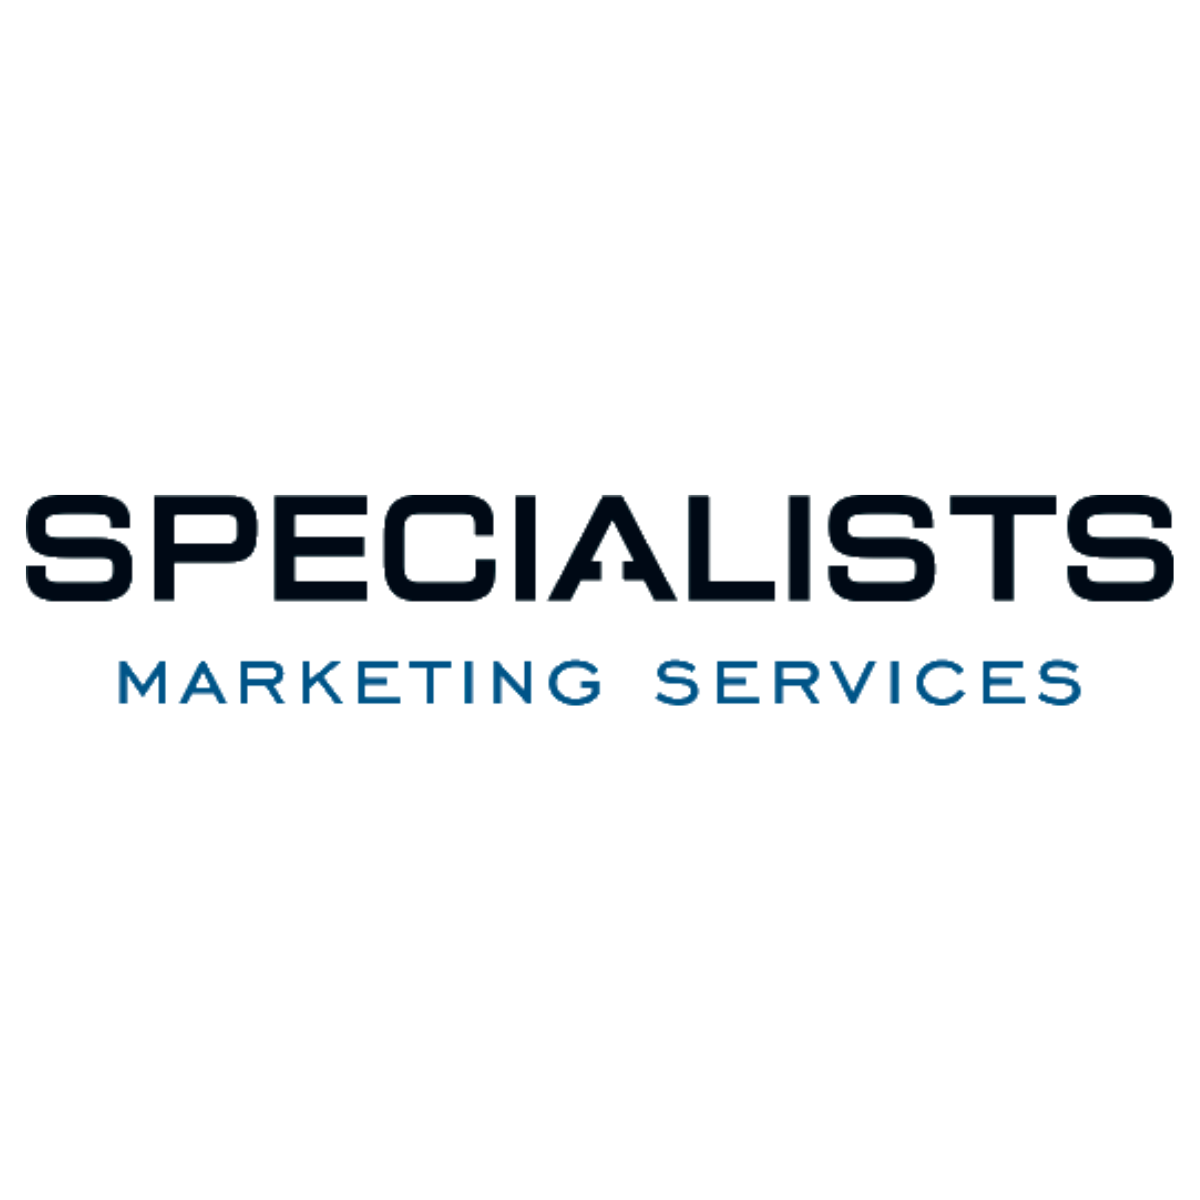 Specialists Marketing Services